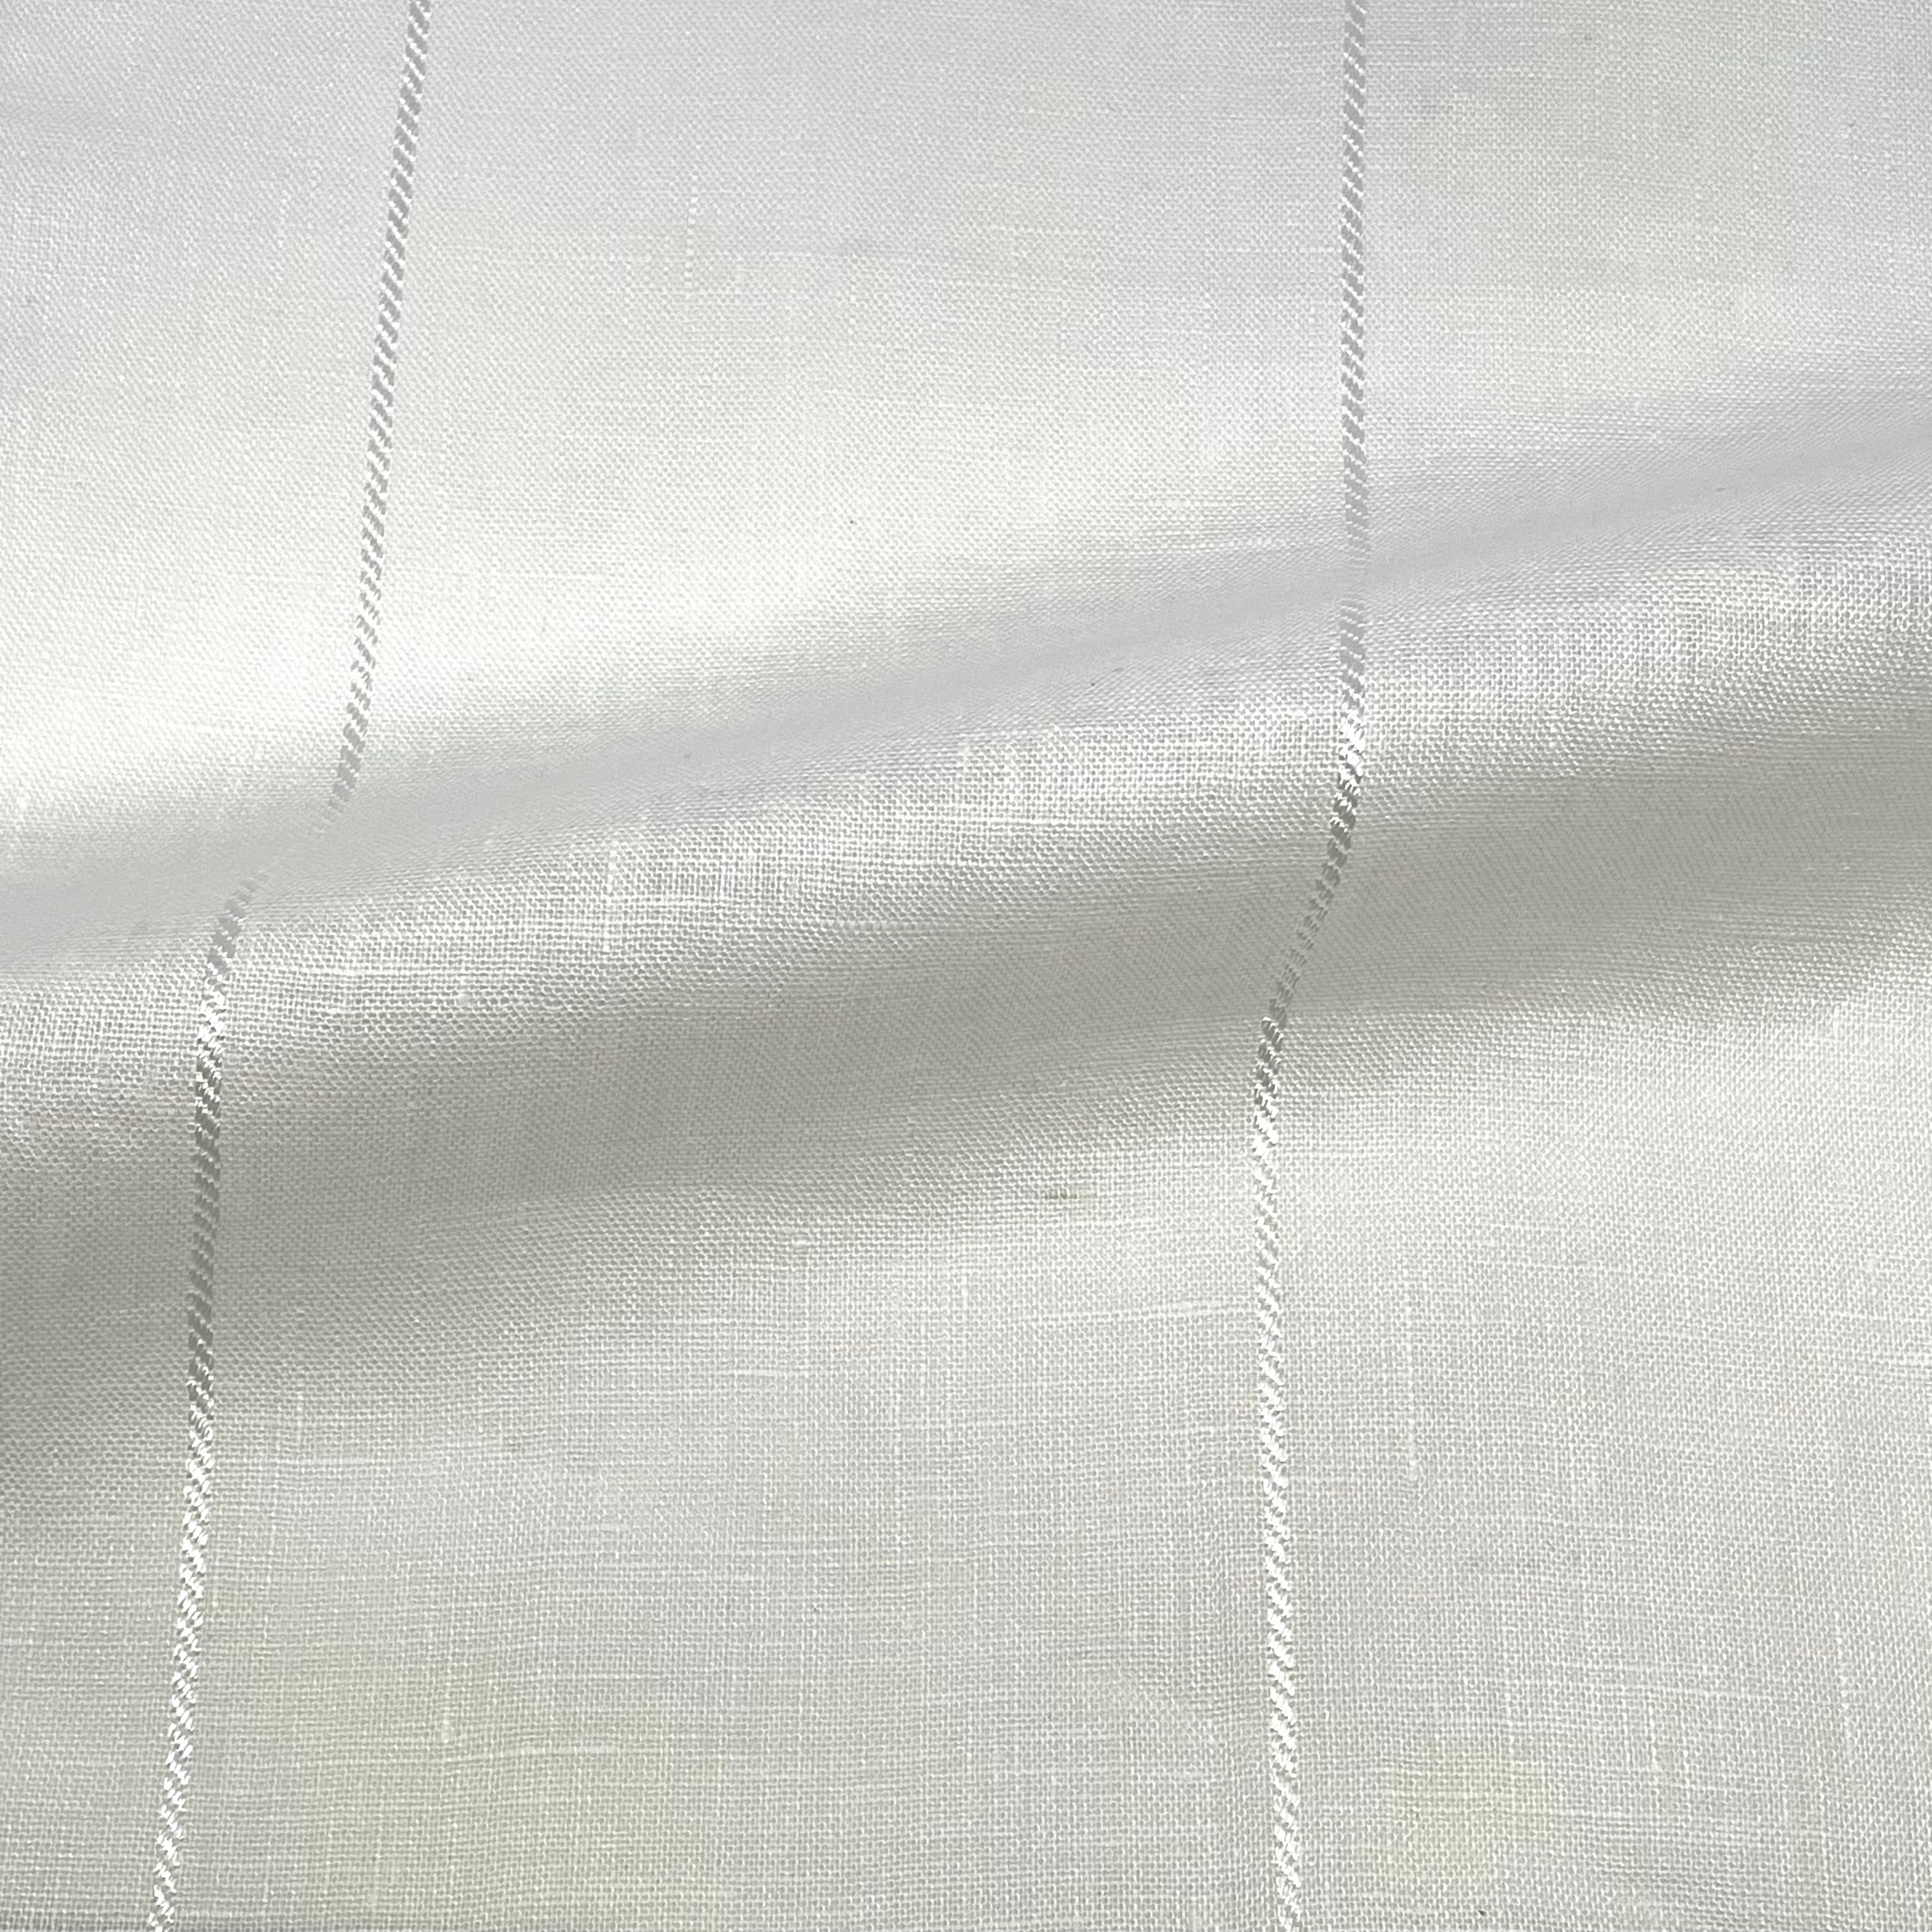 5" Striped Natural Linen Fabric By The Yard, Curtain, Drapery, Table Top, 57" Width